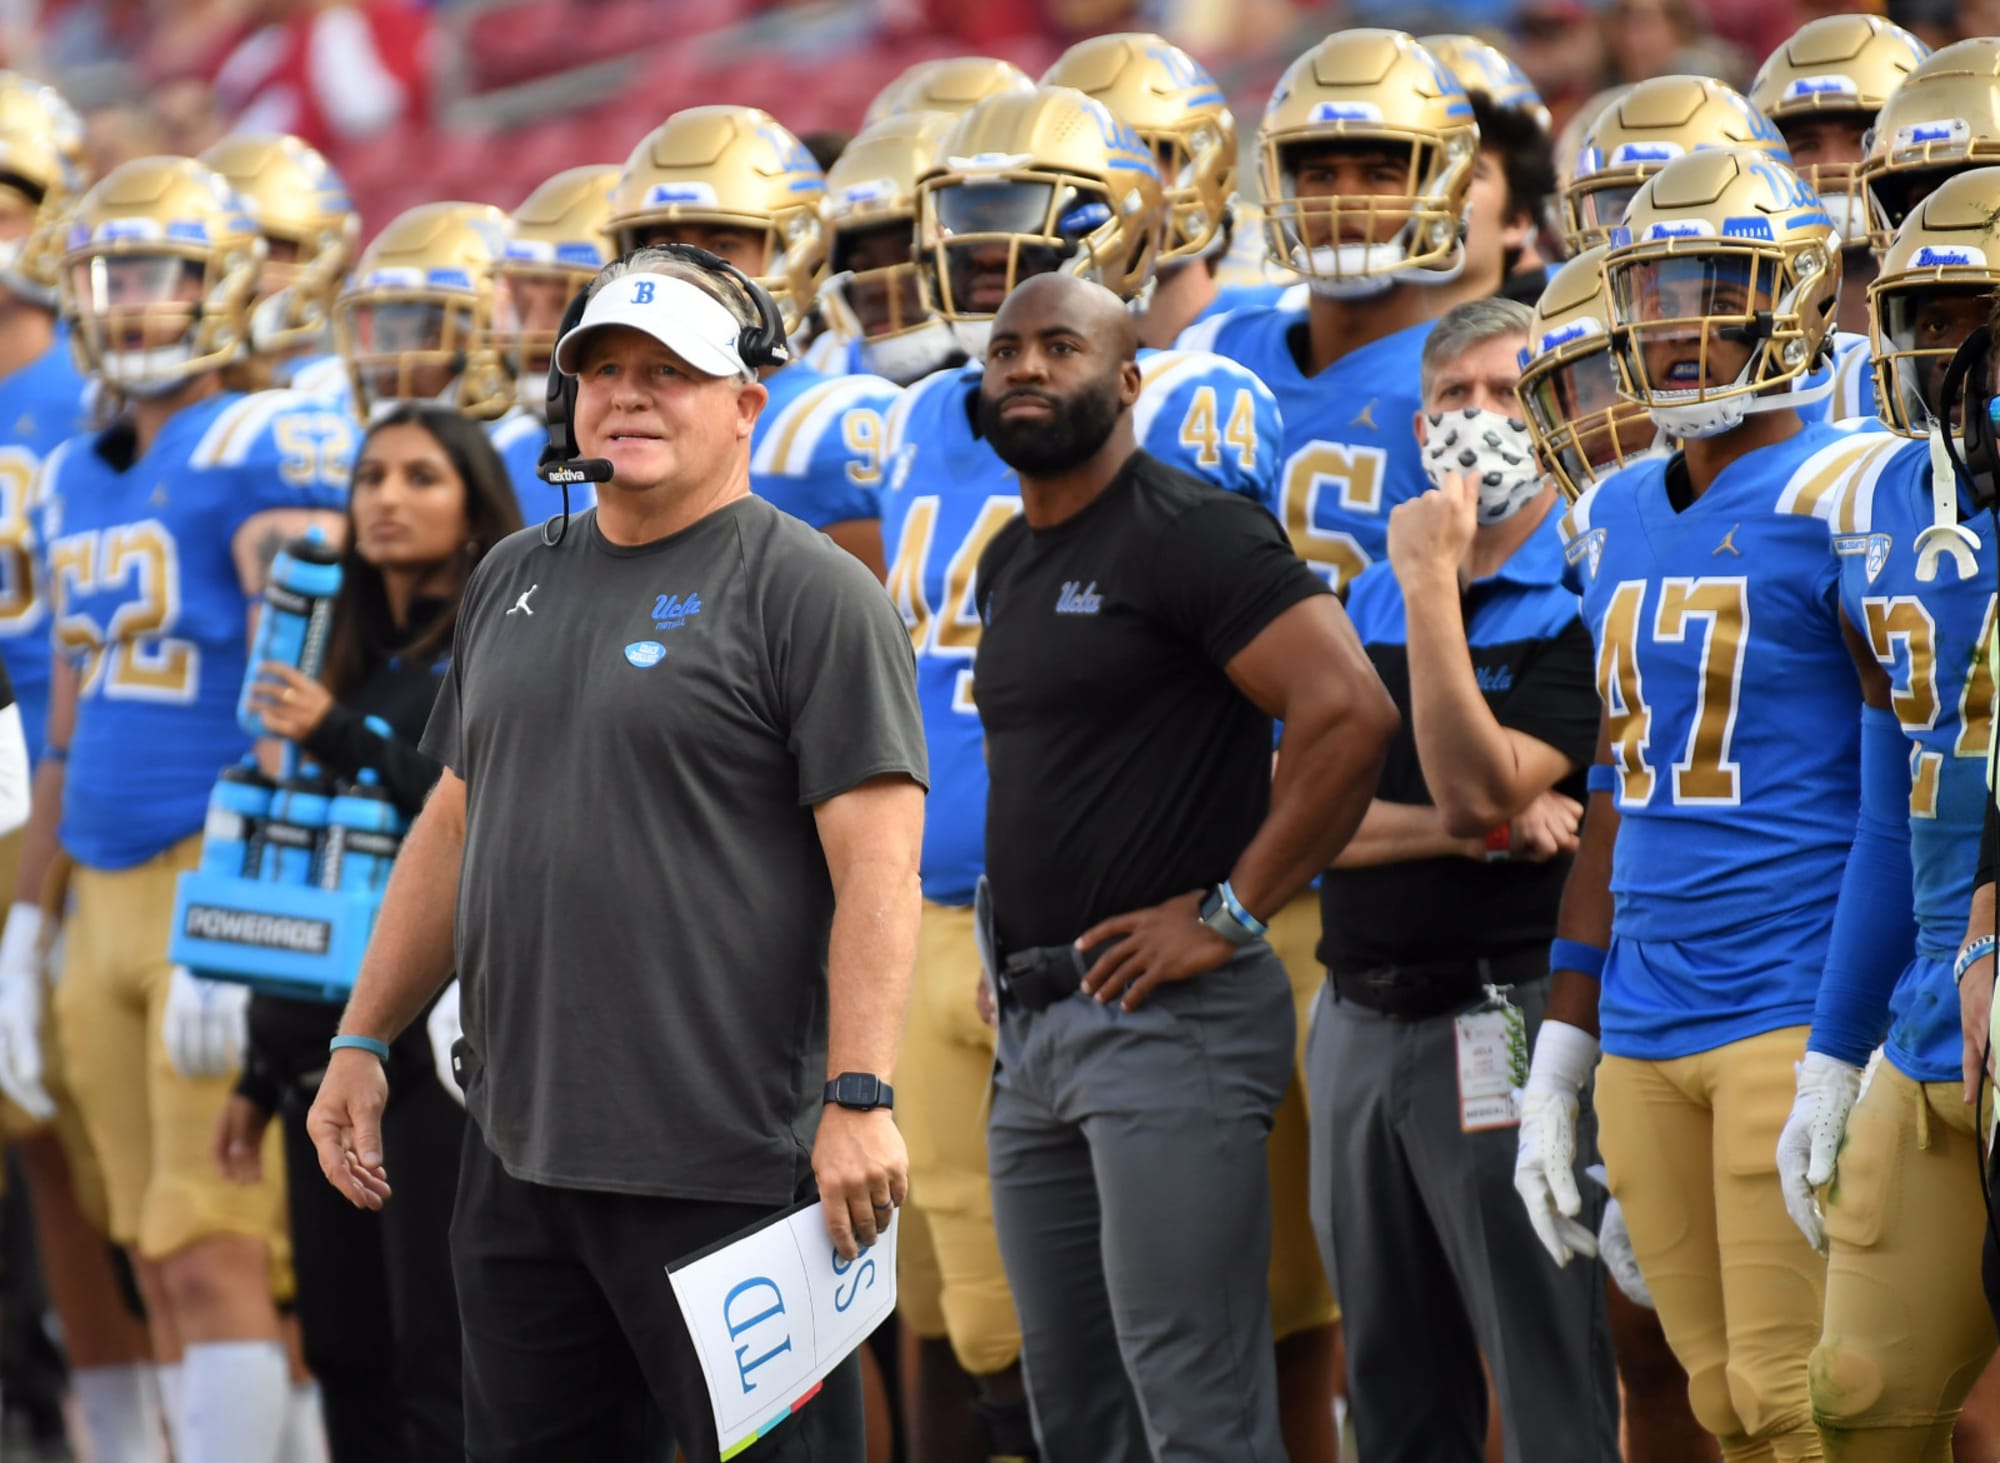 UCLA Football projected to land muchneeded 4star in 2023